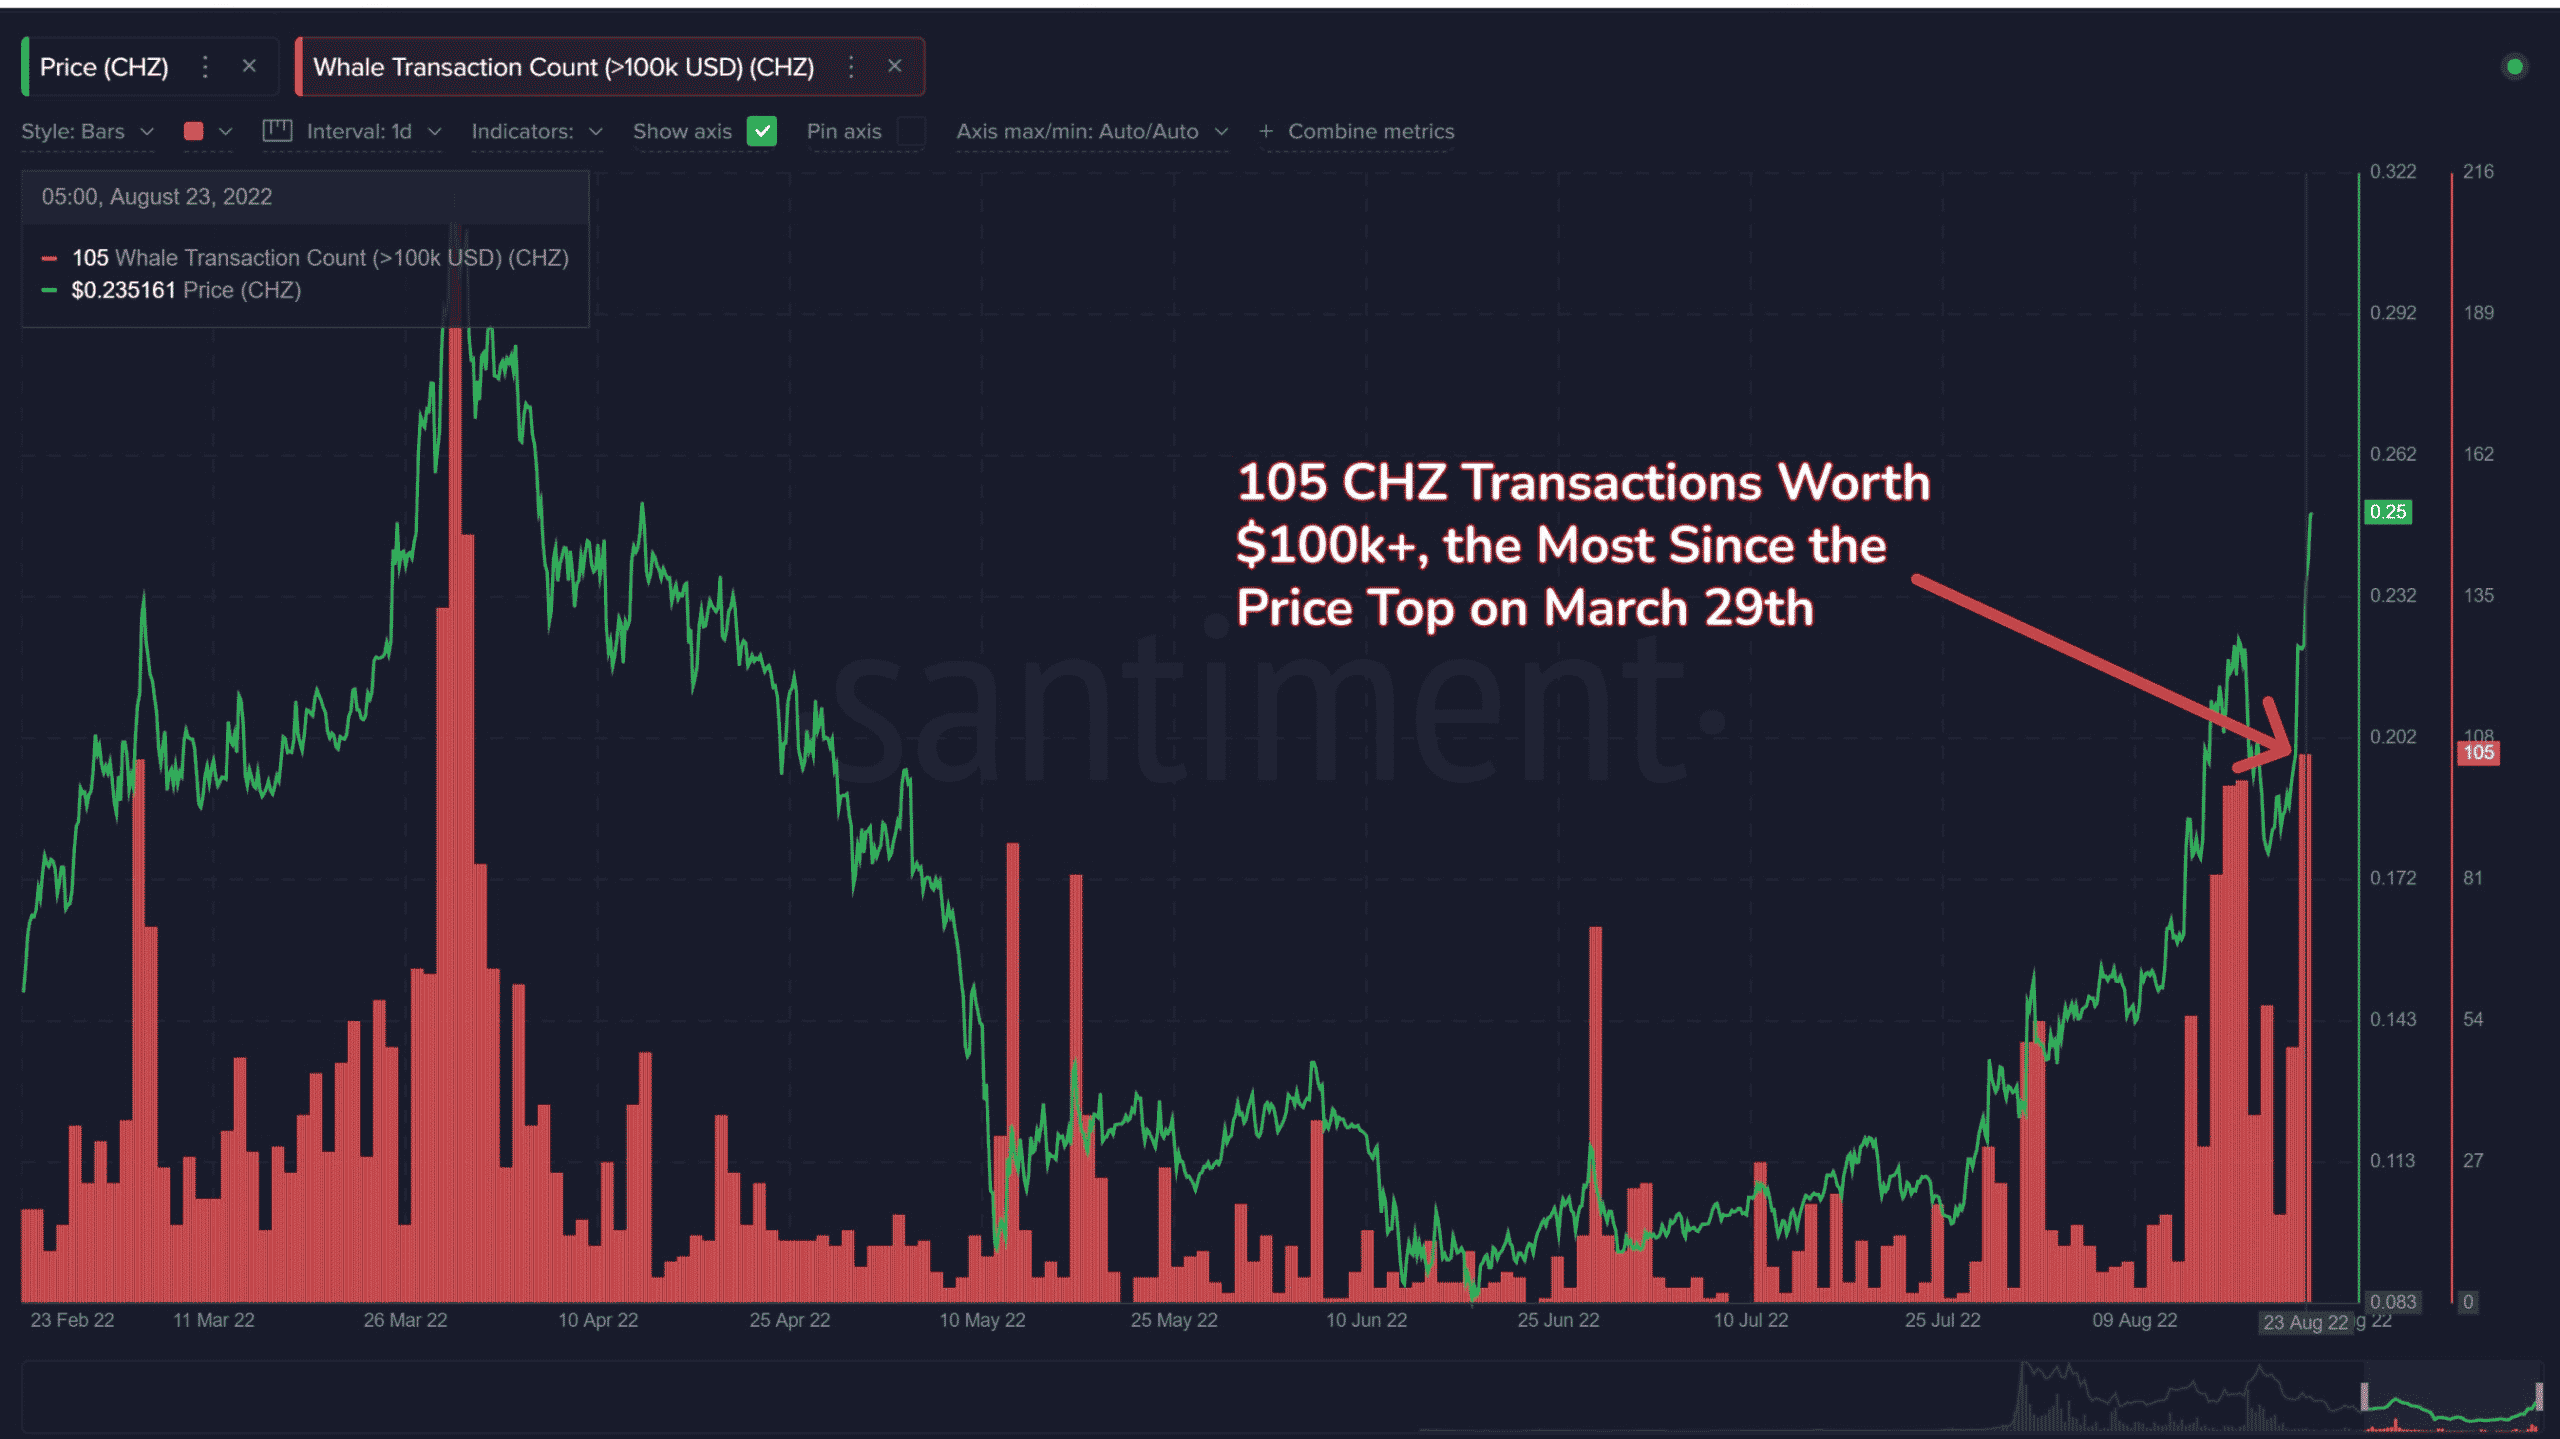 CHZ whale transactions hit the highest network amount since Mar 29.